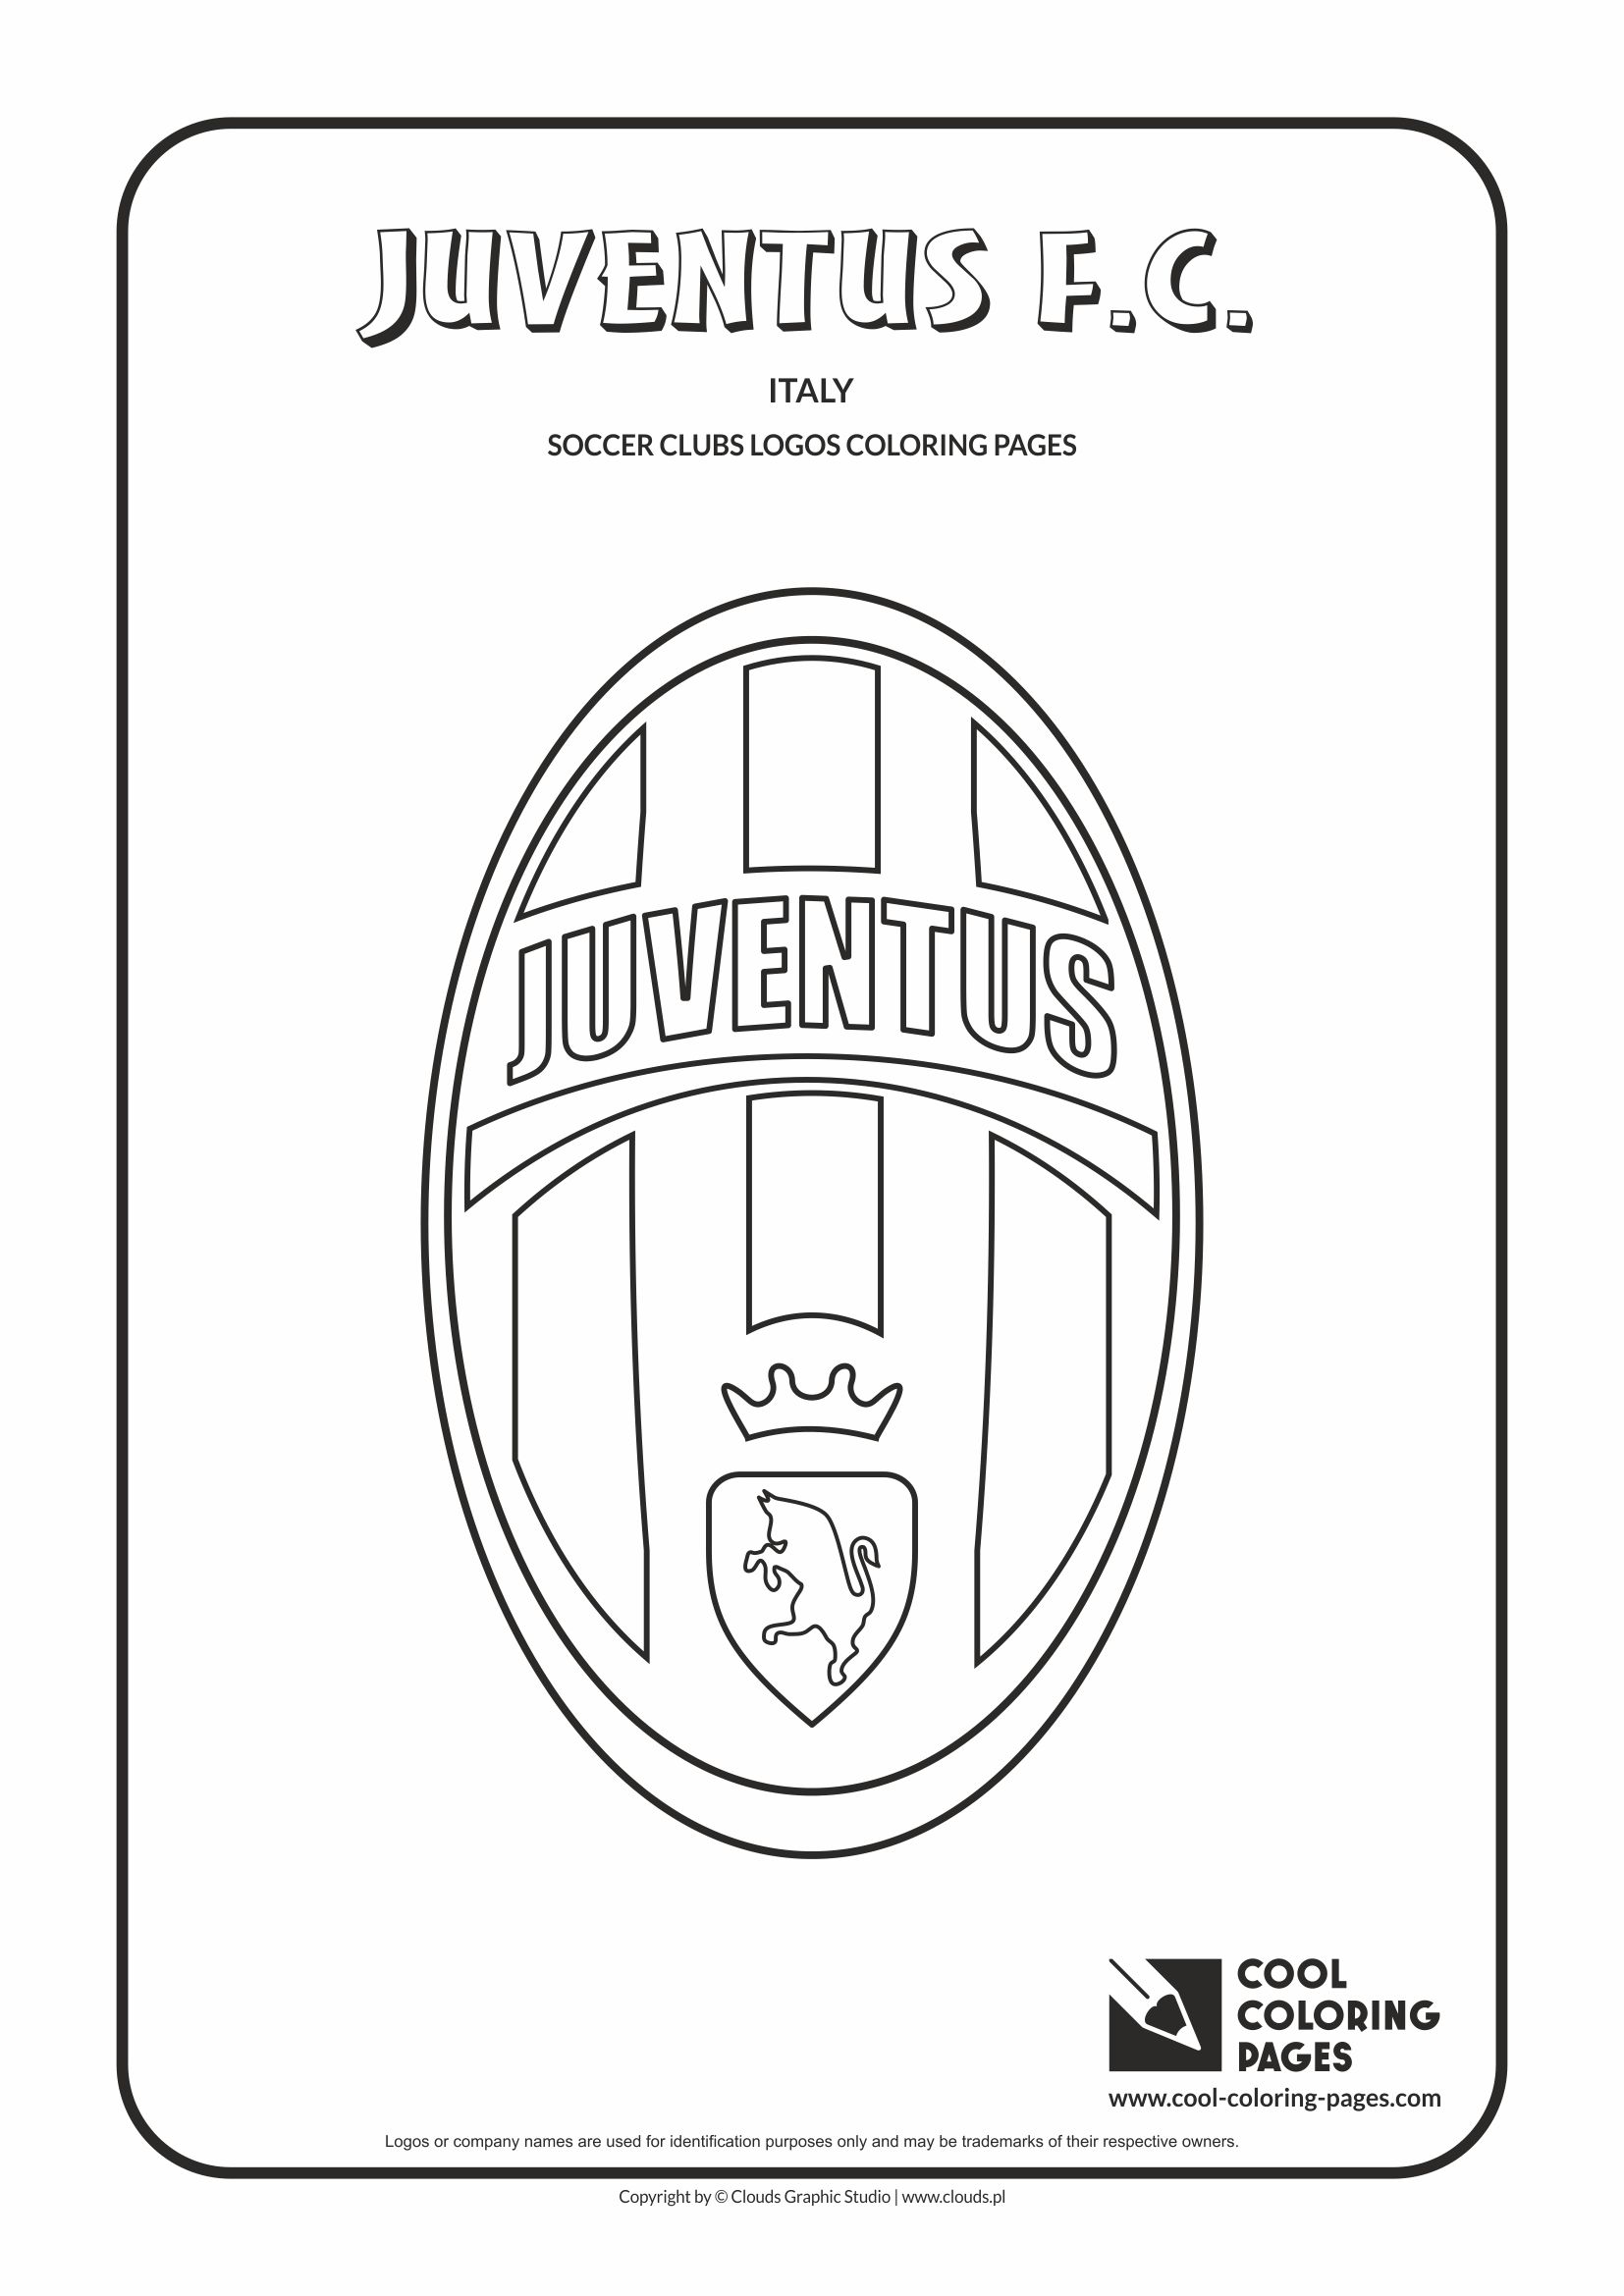 Cool Coloring Pages - Soccer Clubs Logos / Juventus F.C. logo / Coloring page with Juventus F.C. logo